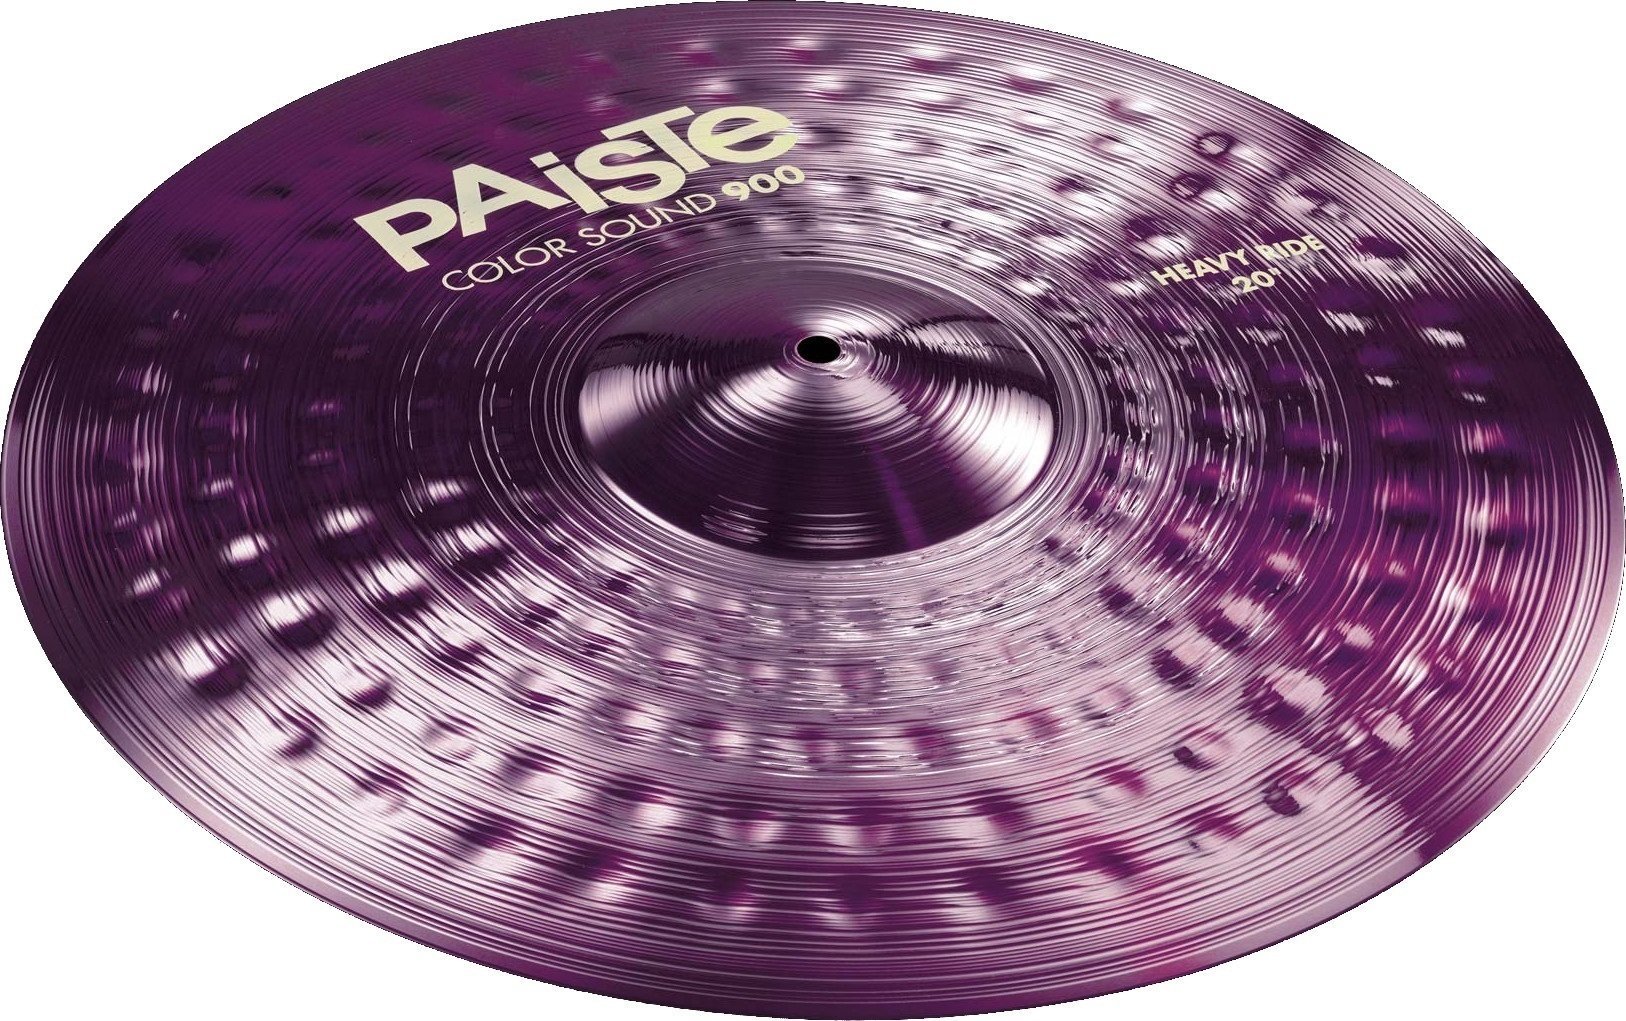 Ride Cymbal Paiste Color Sound 900  Heavy Ride Cymbal 20" Violet